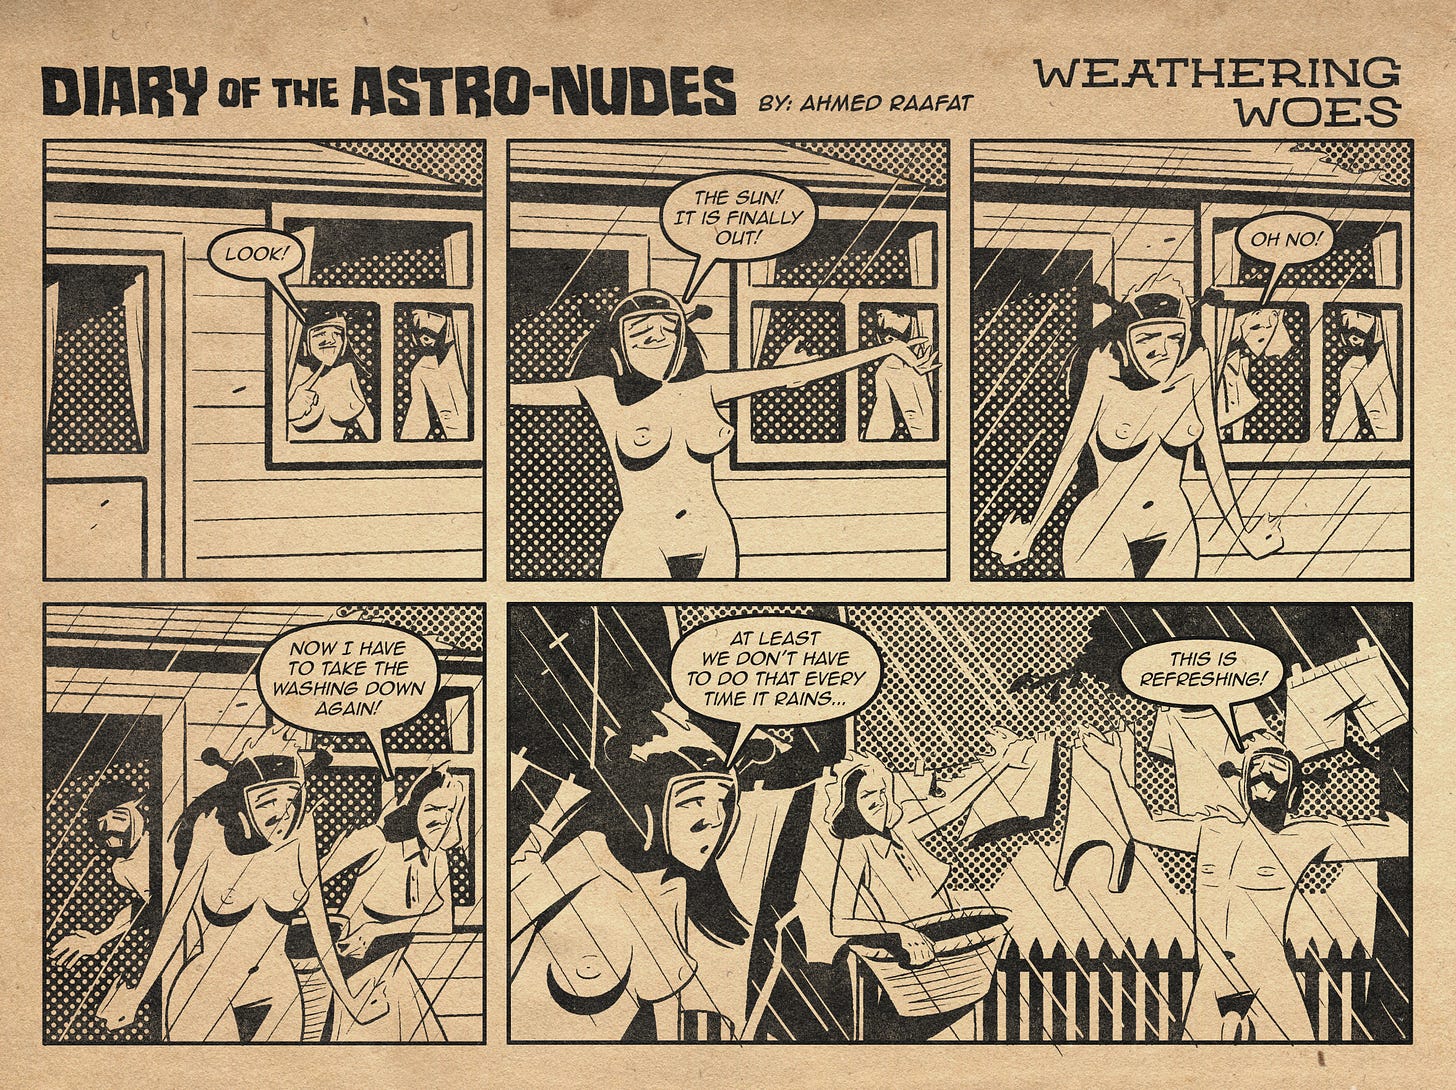 Astronudes alt text  The comic is drawn in a retro style, mimicking the look of 1950s comic books with dot shading and a sepia tone. It features two nude characters, Ar and Arreya, a man and woman who are inter-dimensional travelers from a world where clothes do not exist, living with an older couple named Brad and Janet.  Panel 1: Inside a house, Arreya excitedly points out of the window saying, "Look!" Ar stands beside her, peering outside with curiosity.  Panel 2: Arreya steps outside with her arms stretched out, joyfully exclaiming, "The sun! It is finally out!" Ar remains inside, watching her from the window.  Panel 3: It begins to rain. Arreya looks distressed. A clothed woman, Janet, now next to Ar in the window says "Oh no!"  Panel 4: Janet storms out of the house holding a basket and says, "Now I have to take the washing down again!" Ar follows her out. Arreya stays outside.  Panel 5: Janet works to take down the clothes while Arreya says, "At least we don’t have to do that every time it rains..." Meanwhile, Ar stands with his arms spread wide, enjoying the rain and saying, "This is refreshing!"